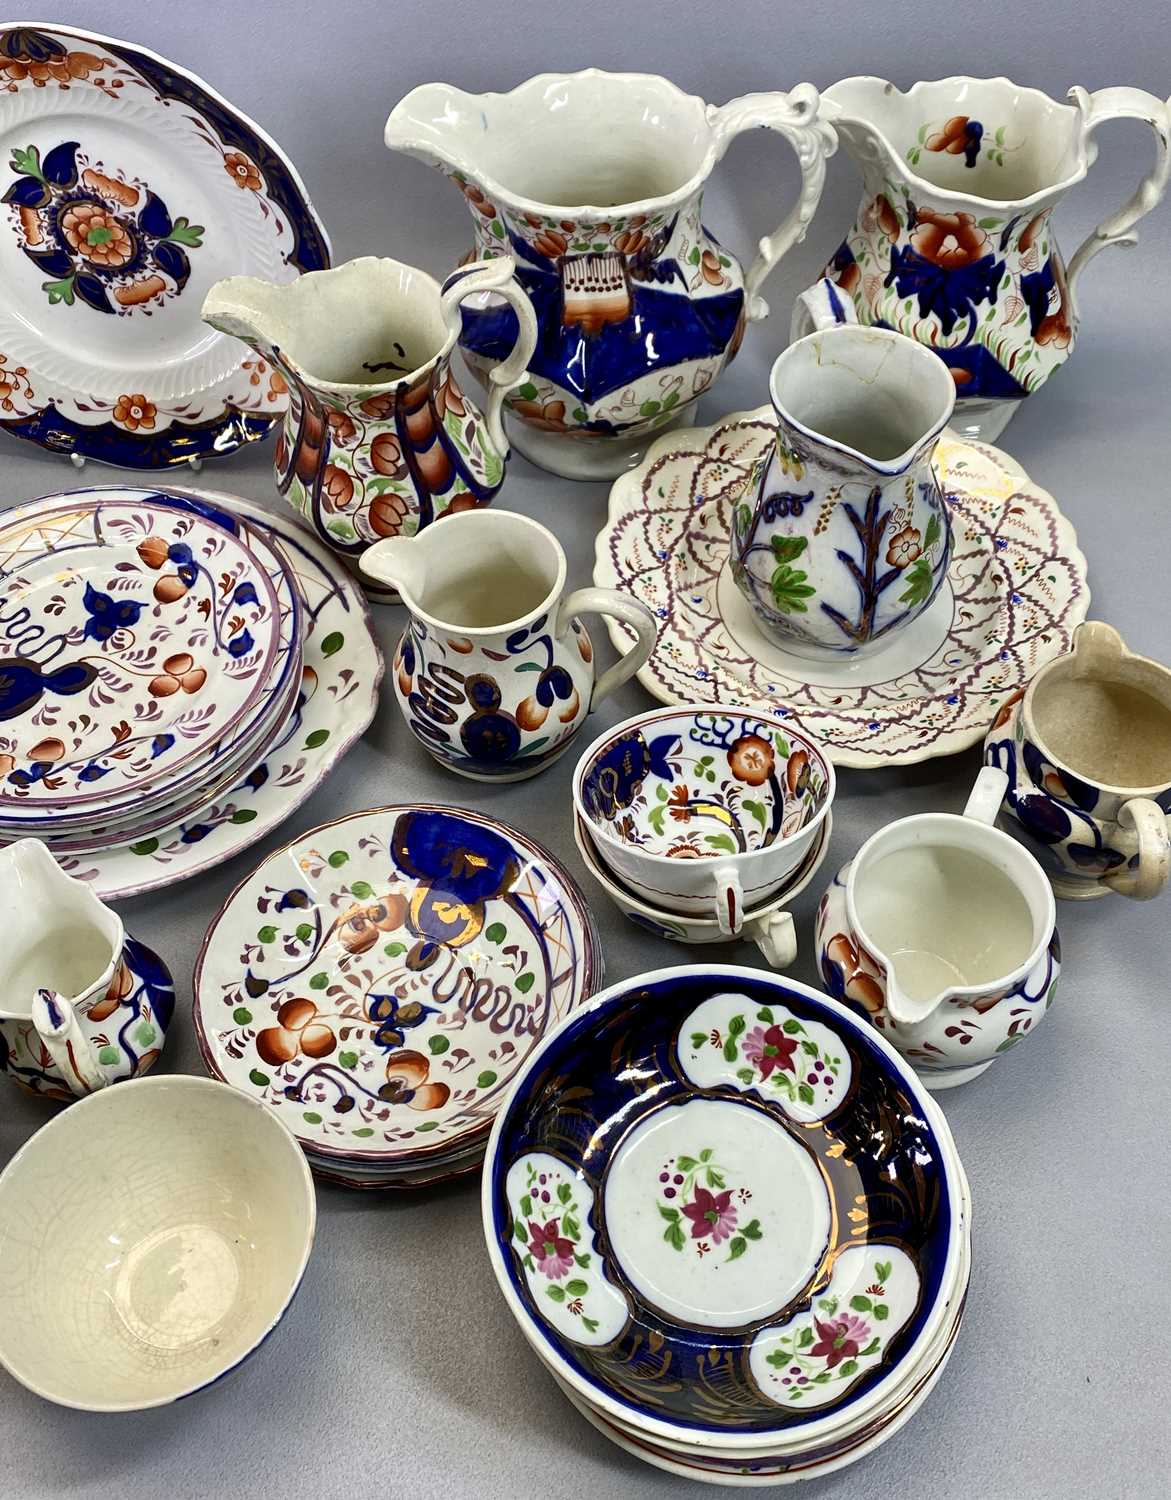 GAUDY WELSH LATE 19TH CENTURY POTTERY - a large selection including a pair of panelled jugs, 18.5cms - Image 3 of 4